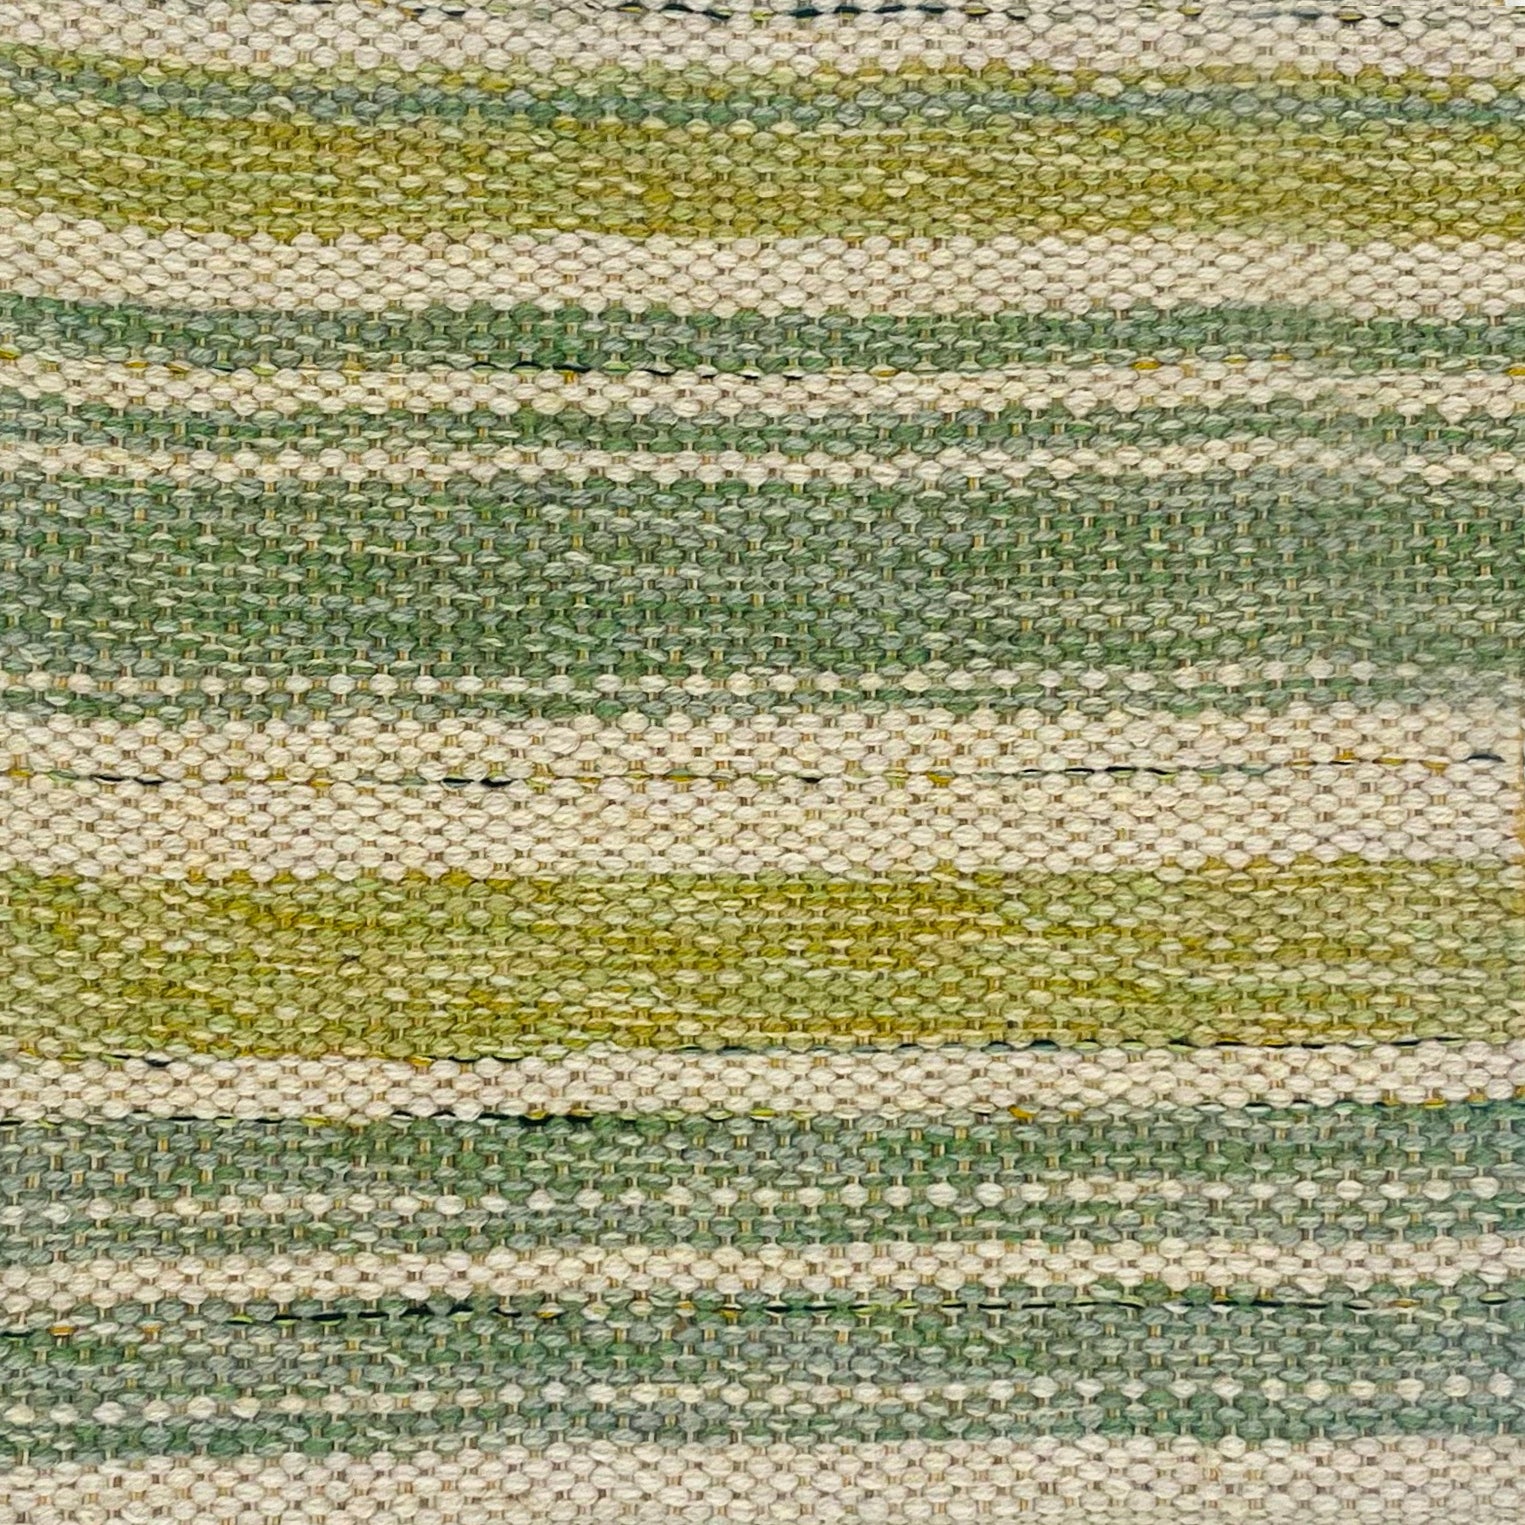 Woven rug swatch in natural fibers in apple green, ecru and sage green mixed width stripe pattern